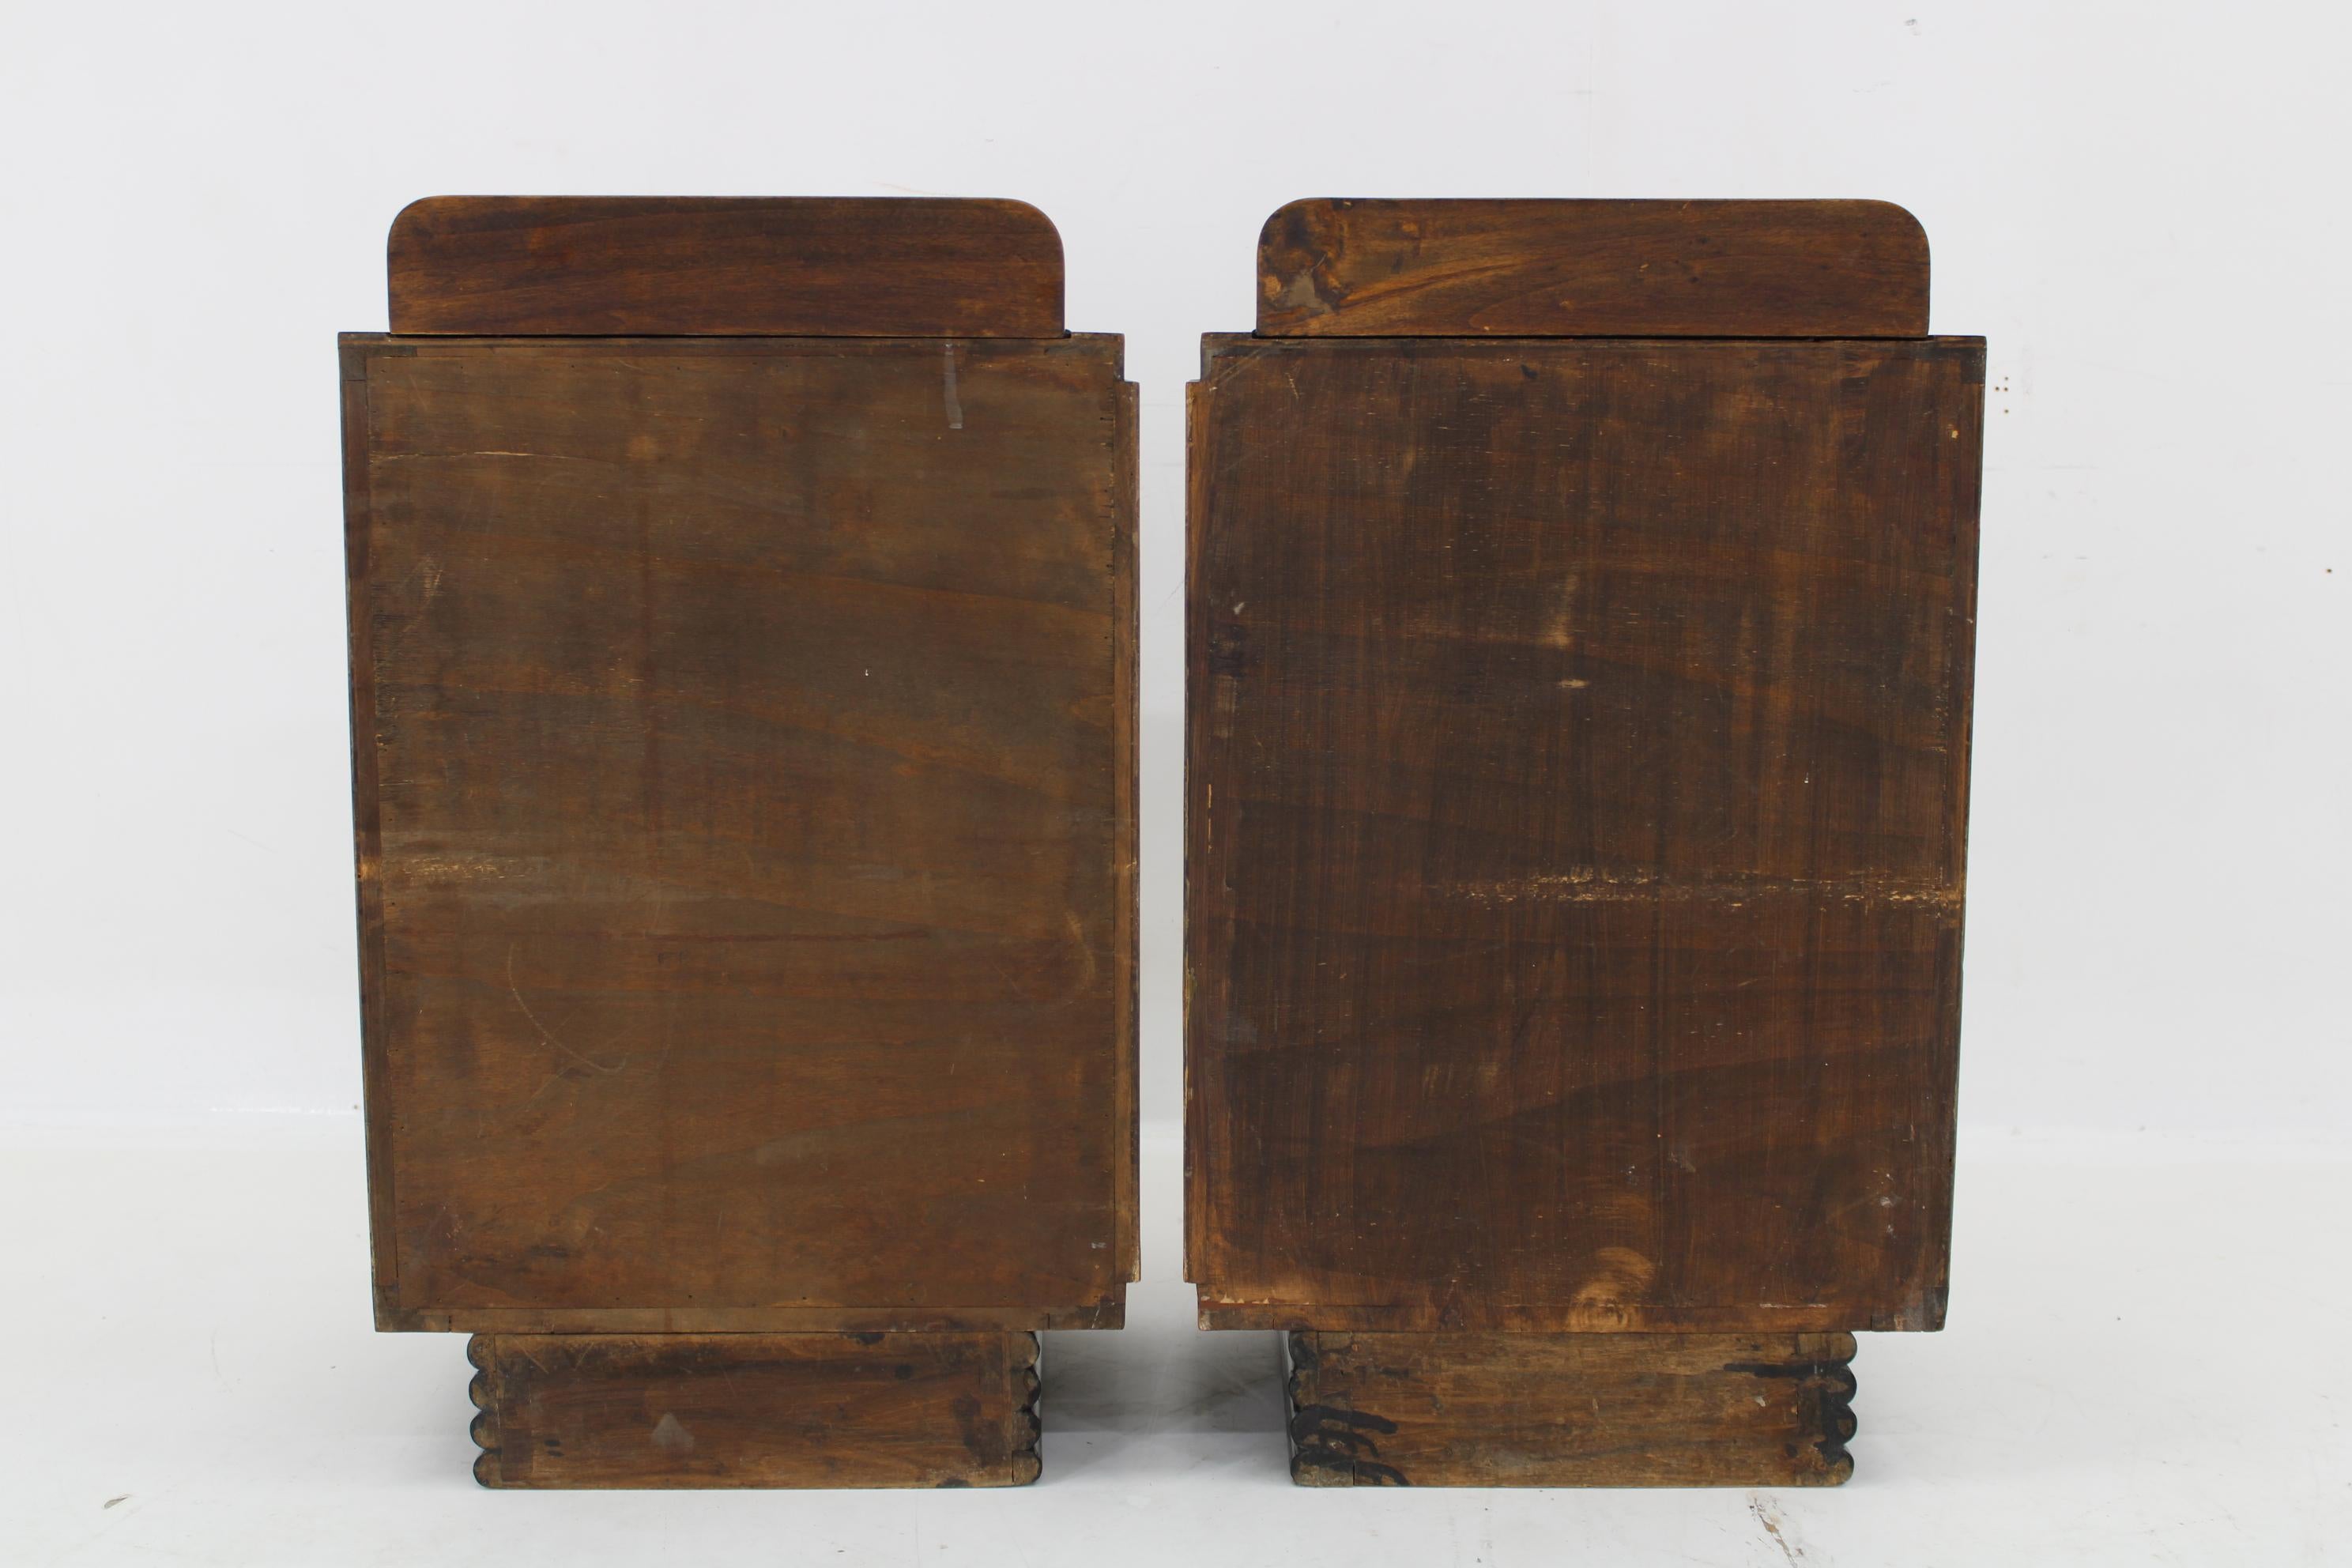 1940s Pair of Art Deco Nightstands in Walnut Finish, Italy For Sale 4